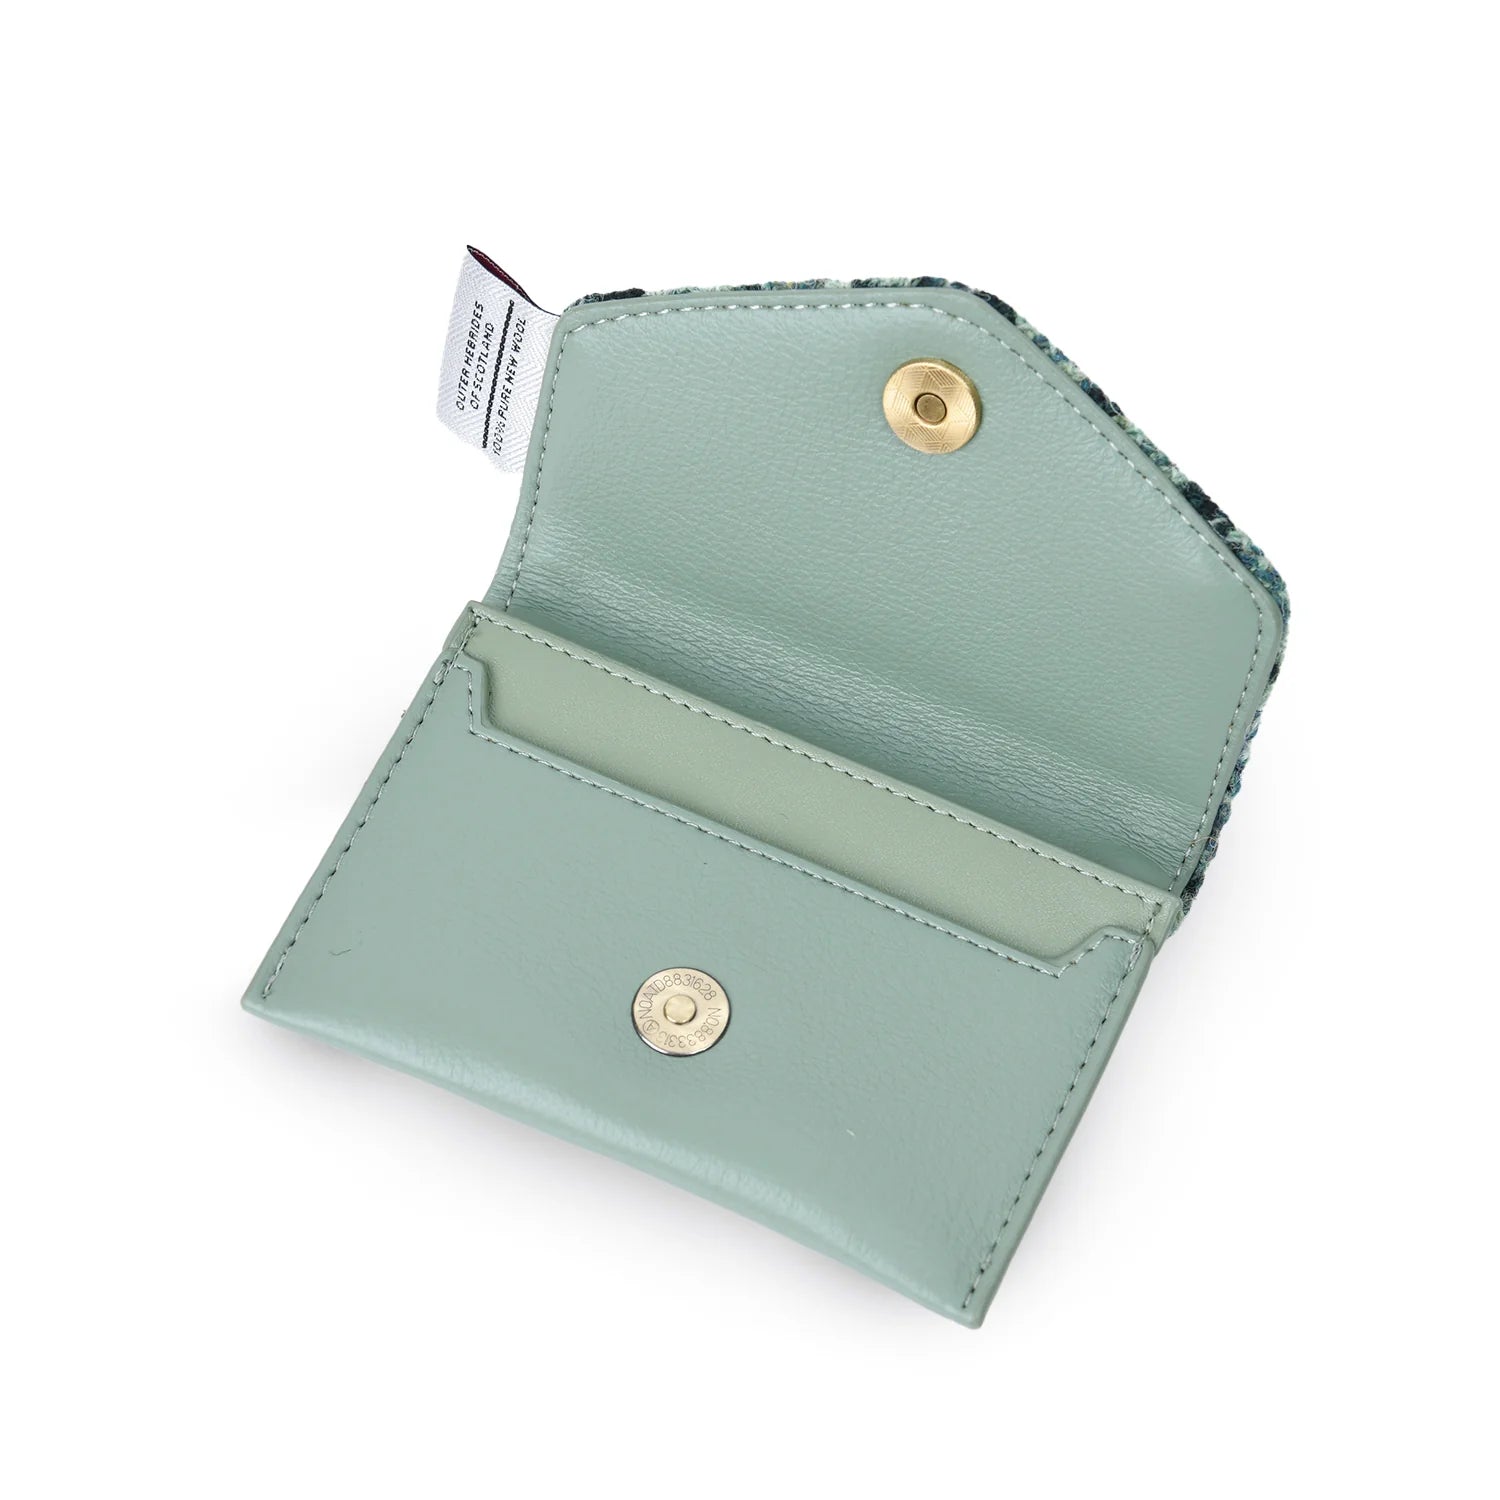 The Card Wallet